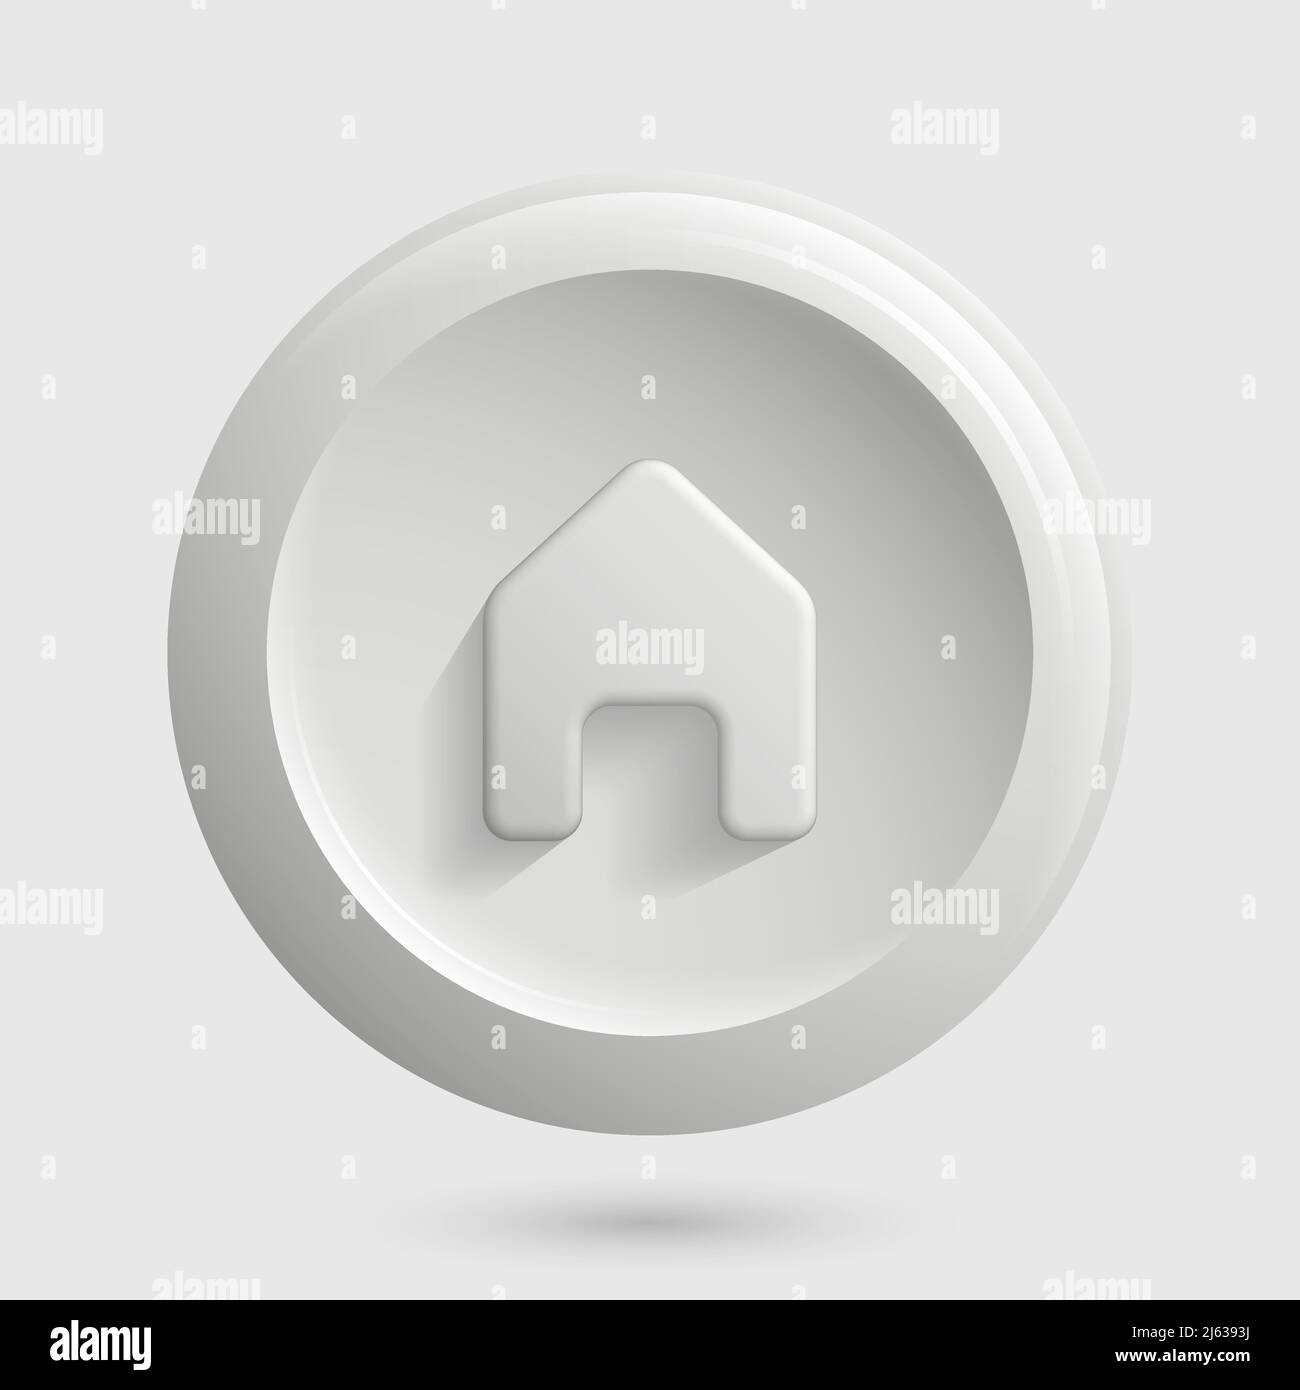 White Home Icon. 3D Round House Button. Vector illustration Stock Vector